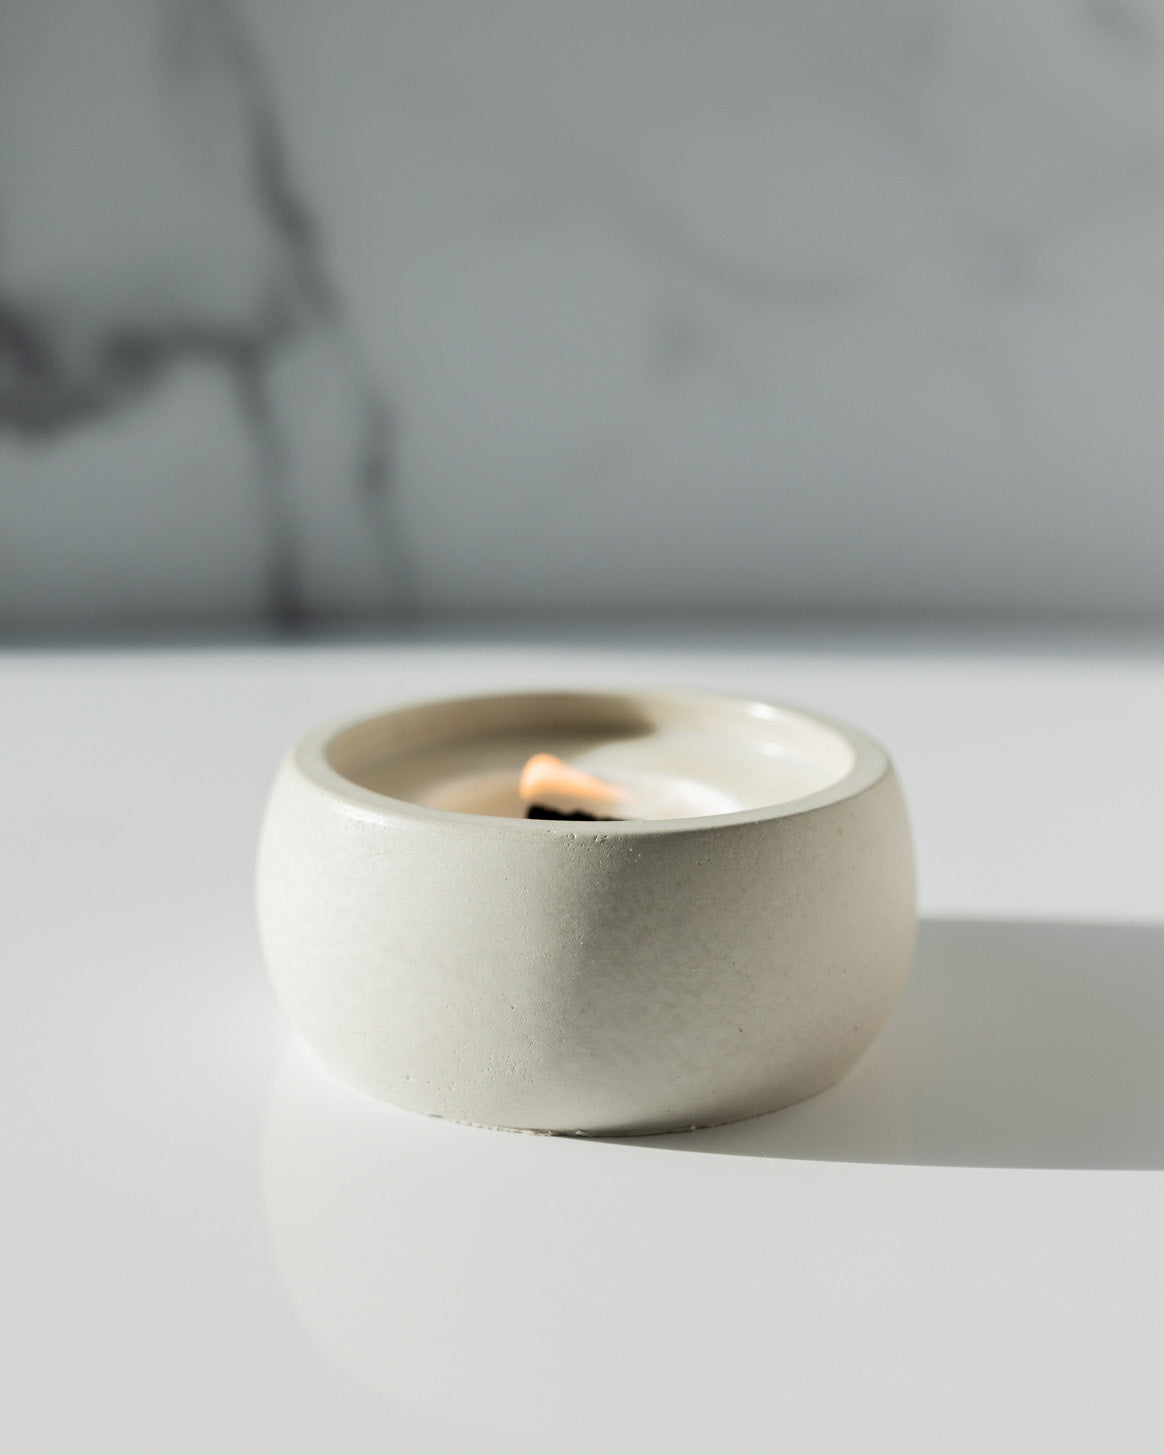 100% Homebody Coconut Soy Candle - Concrete Wooden Wick Vessel